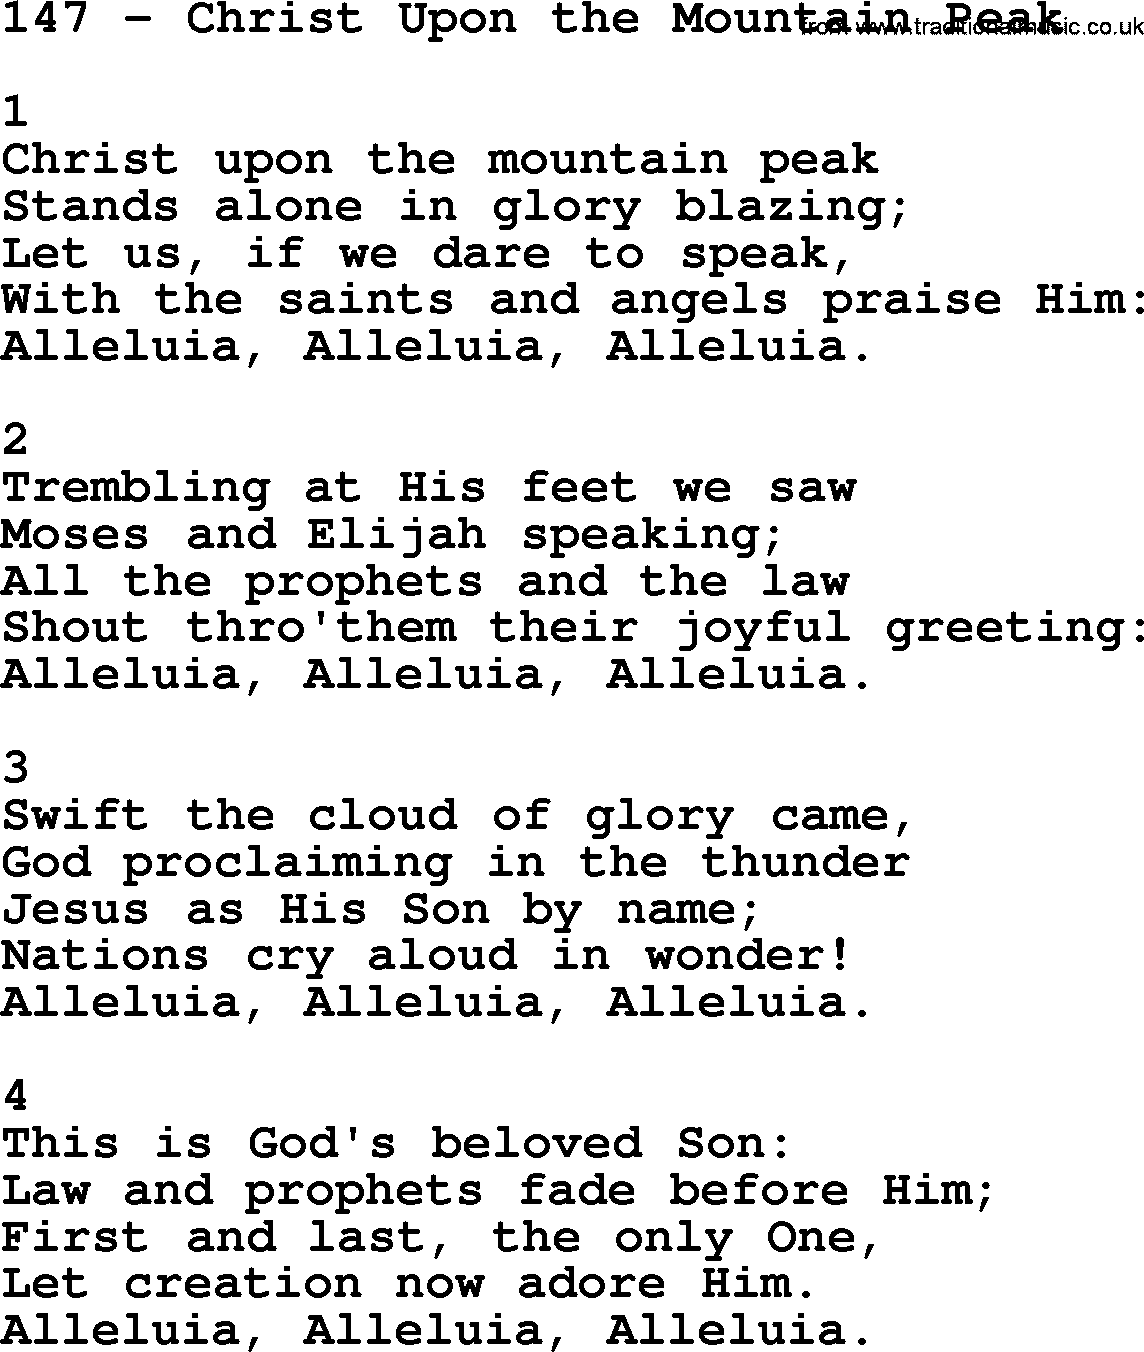 Complete Adventis Hymnal, title: 147-Christ Upon The Mountain Peak, with lyrics, midi, mp3, powerpoints(PPT) and PDF,